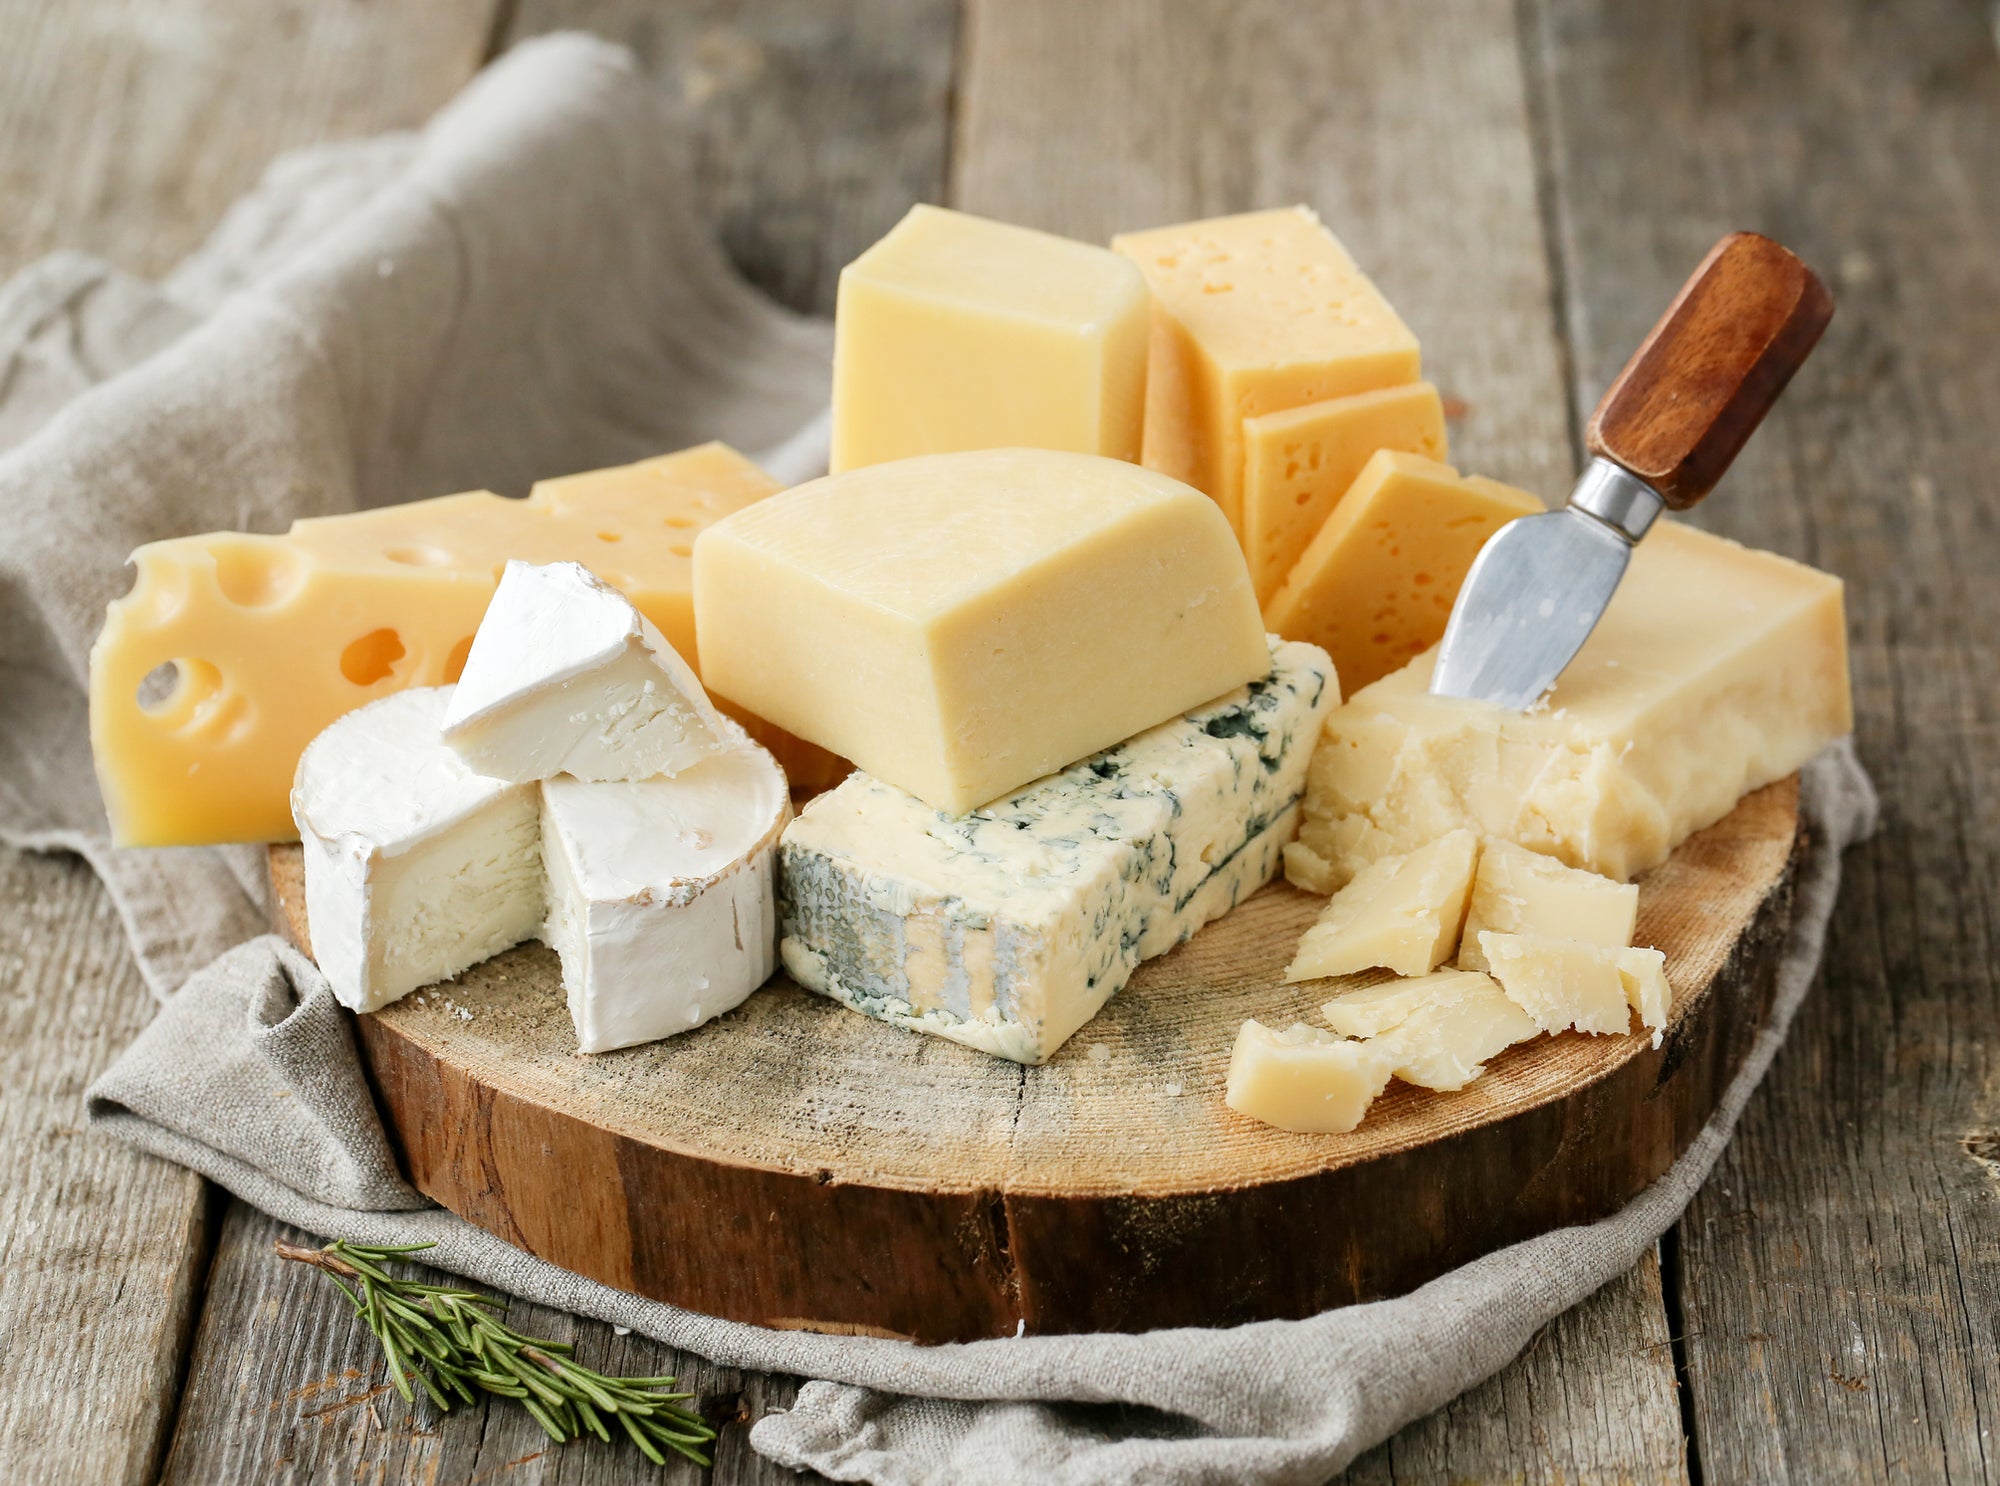 What Kind Of Cheese Is Good For Gift Baskets?